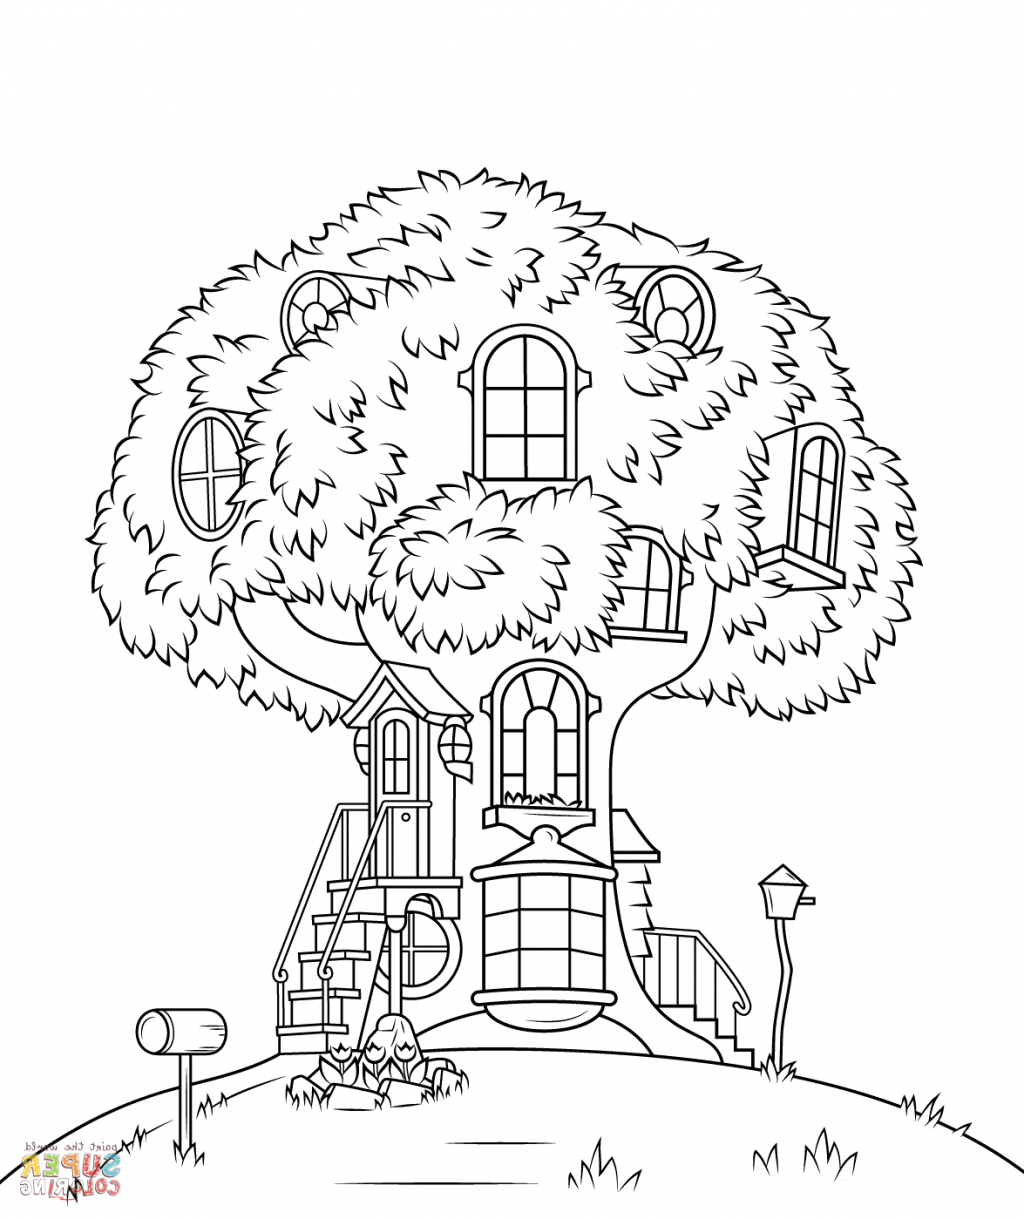 Berenstain Bears Coloring Pages Coloring Page Berenstain Bears Halloween Coloring Pages Home